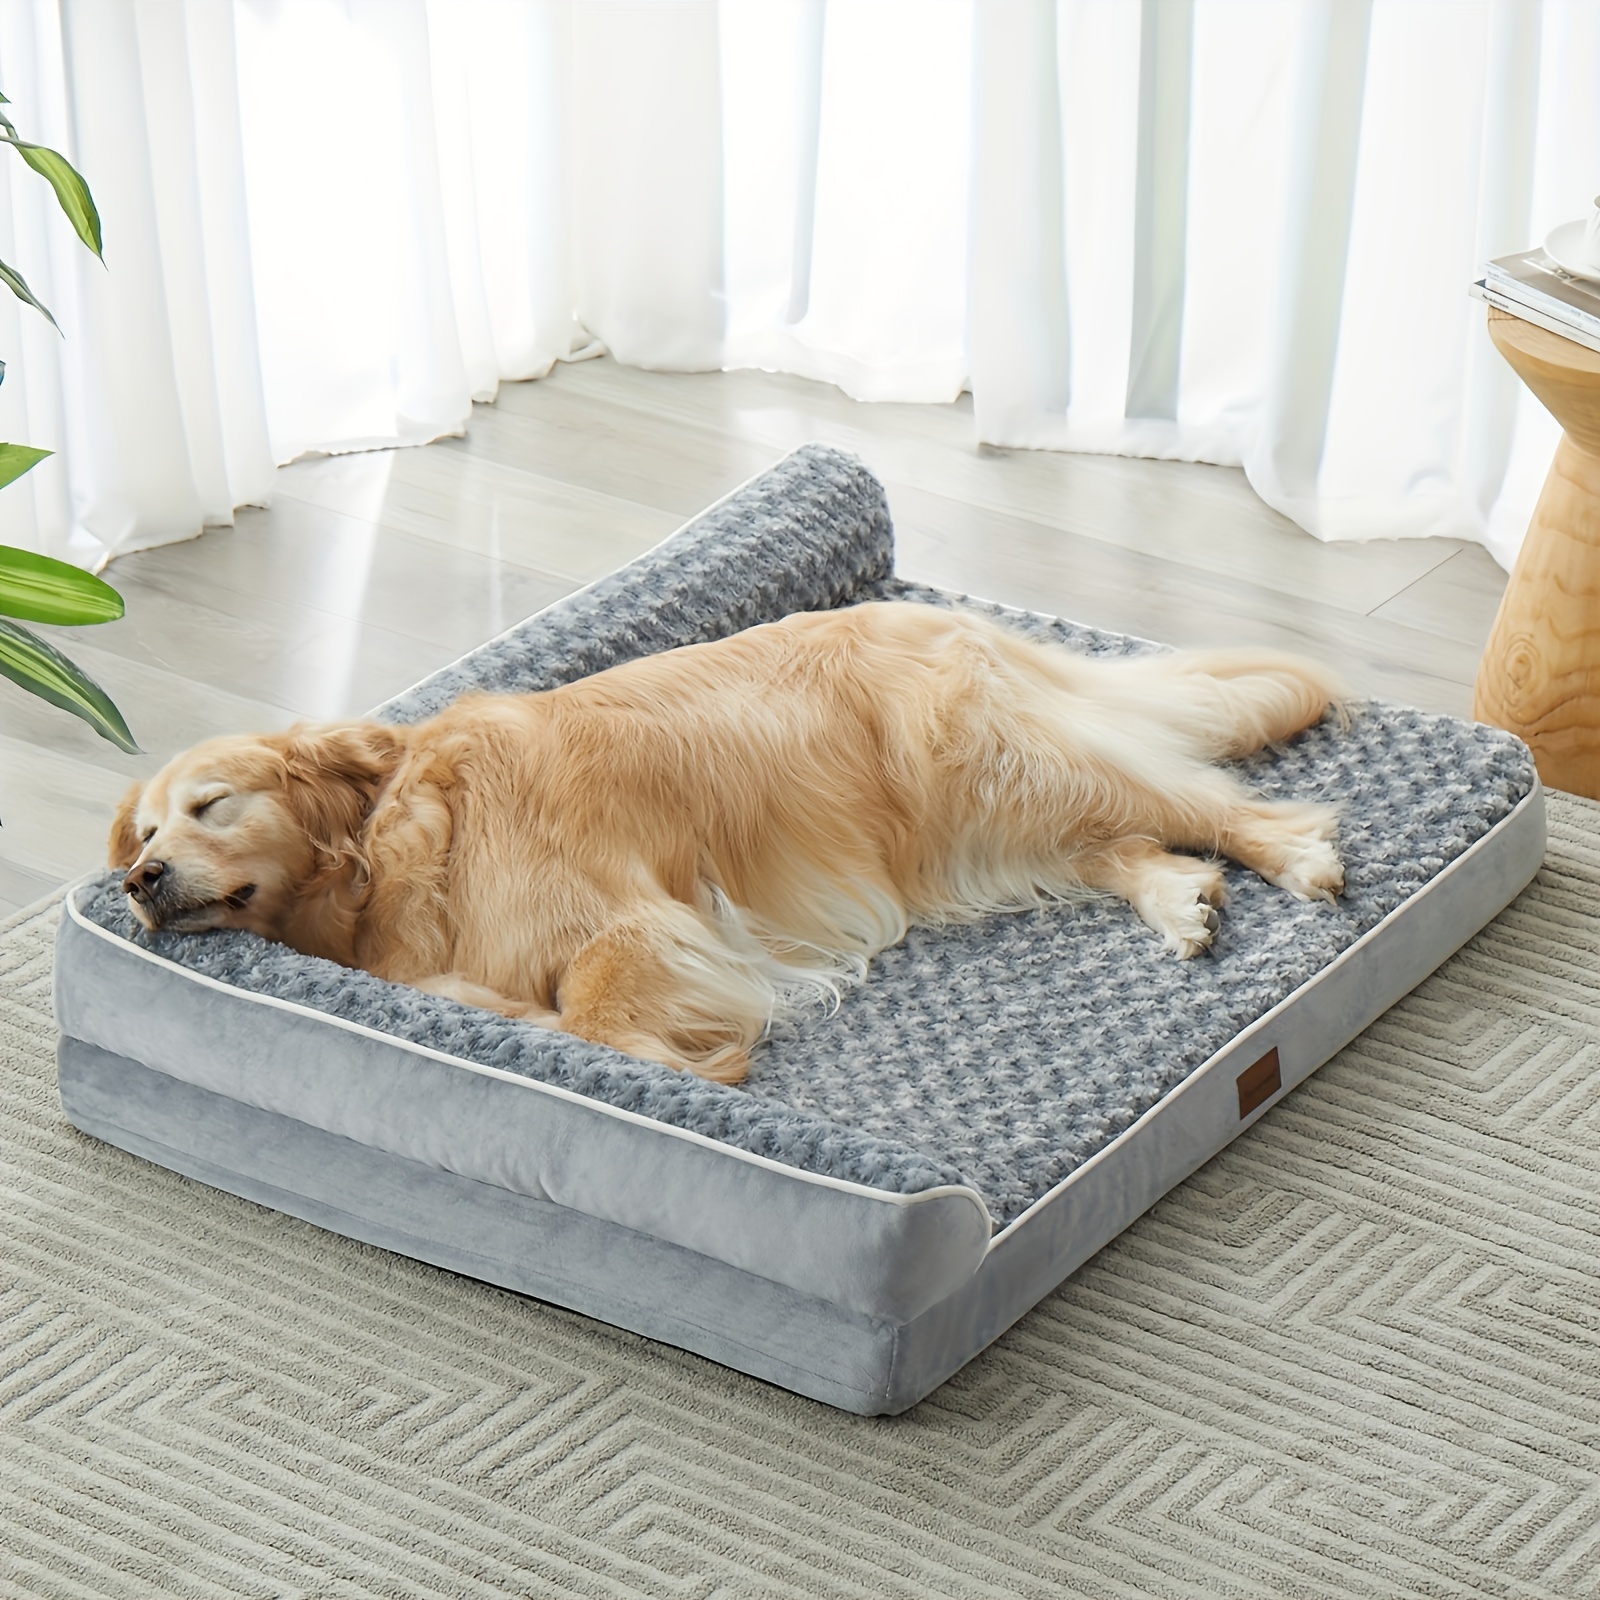 

Large Orthopedic Bed For Large Dogs-big Waterproof Sofa Dog Bed With Removable Washable Cover, Large Dog Bed With Waterproof Lining And Nonskid Bottom, Pet Bed For Large Dogs